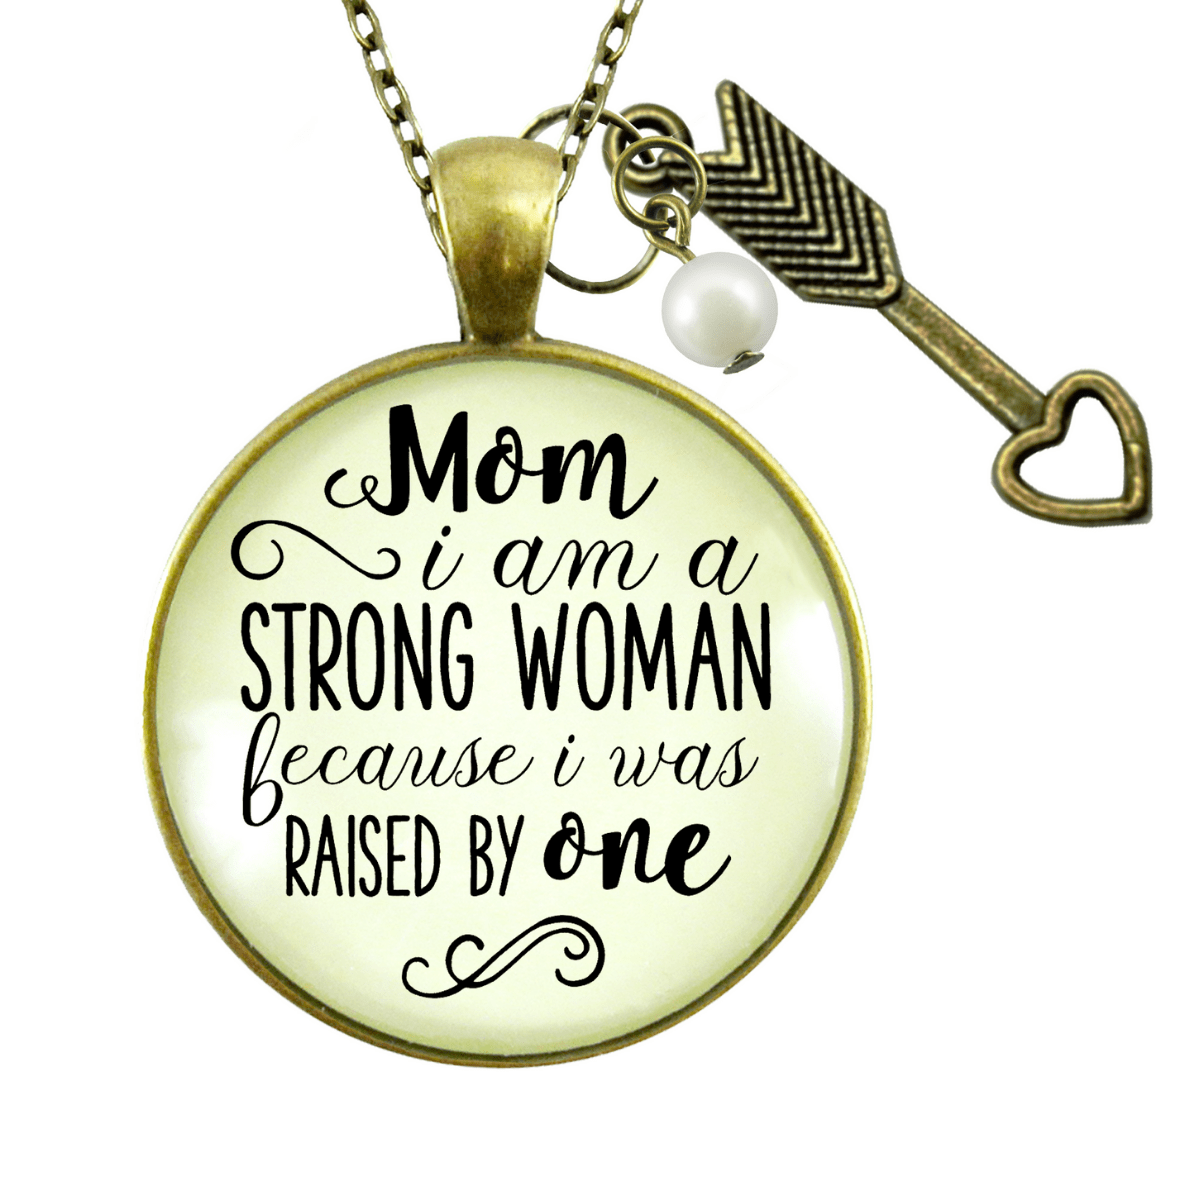 Gutsy Goodness To Mother From Daughter Necklace Mom I Am A Strong Woman Because of You Gift - Gutsy Goodness Handmade Jewelry;To Mother From Daughter Necklace Mom I Am A Strong Woman Because Of You Gift - Gutsy Goodness Handmade Jewelry Gifts